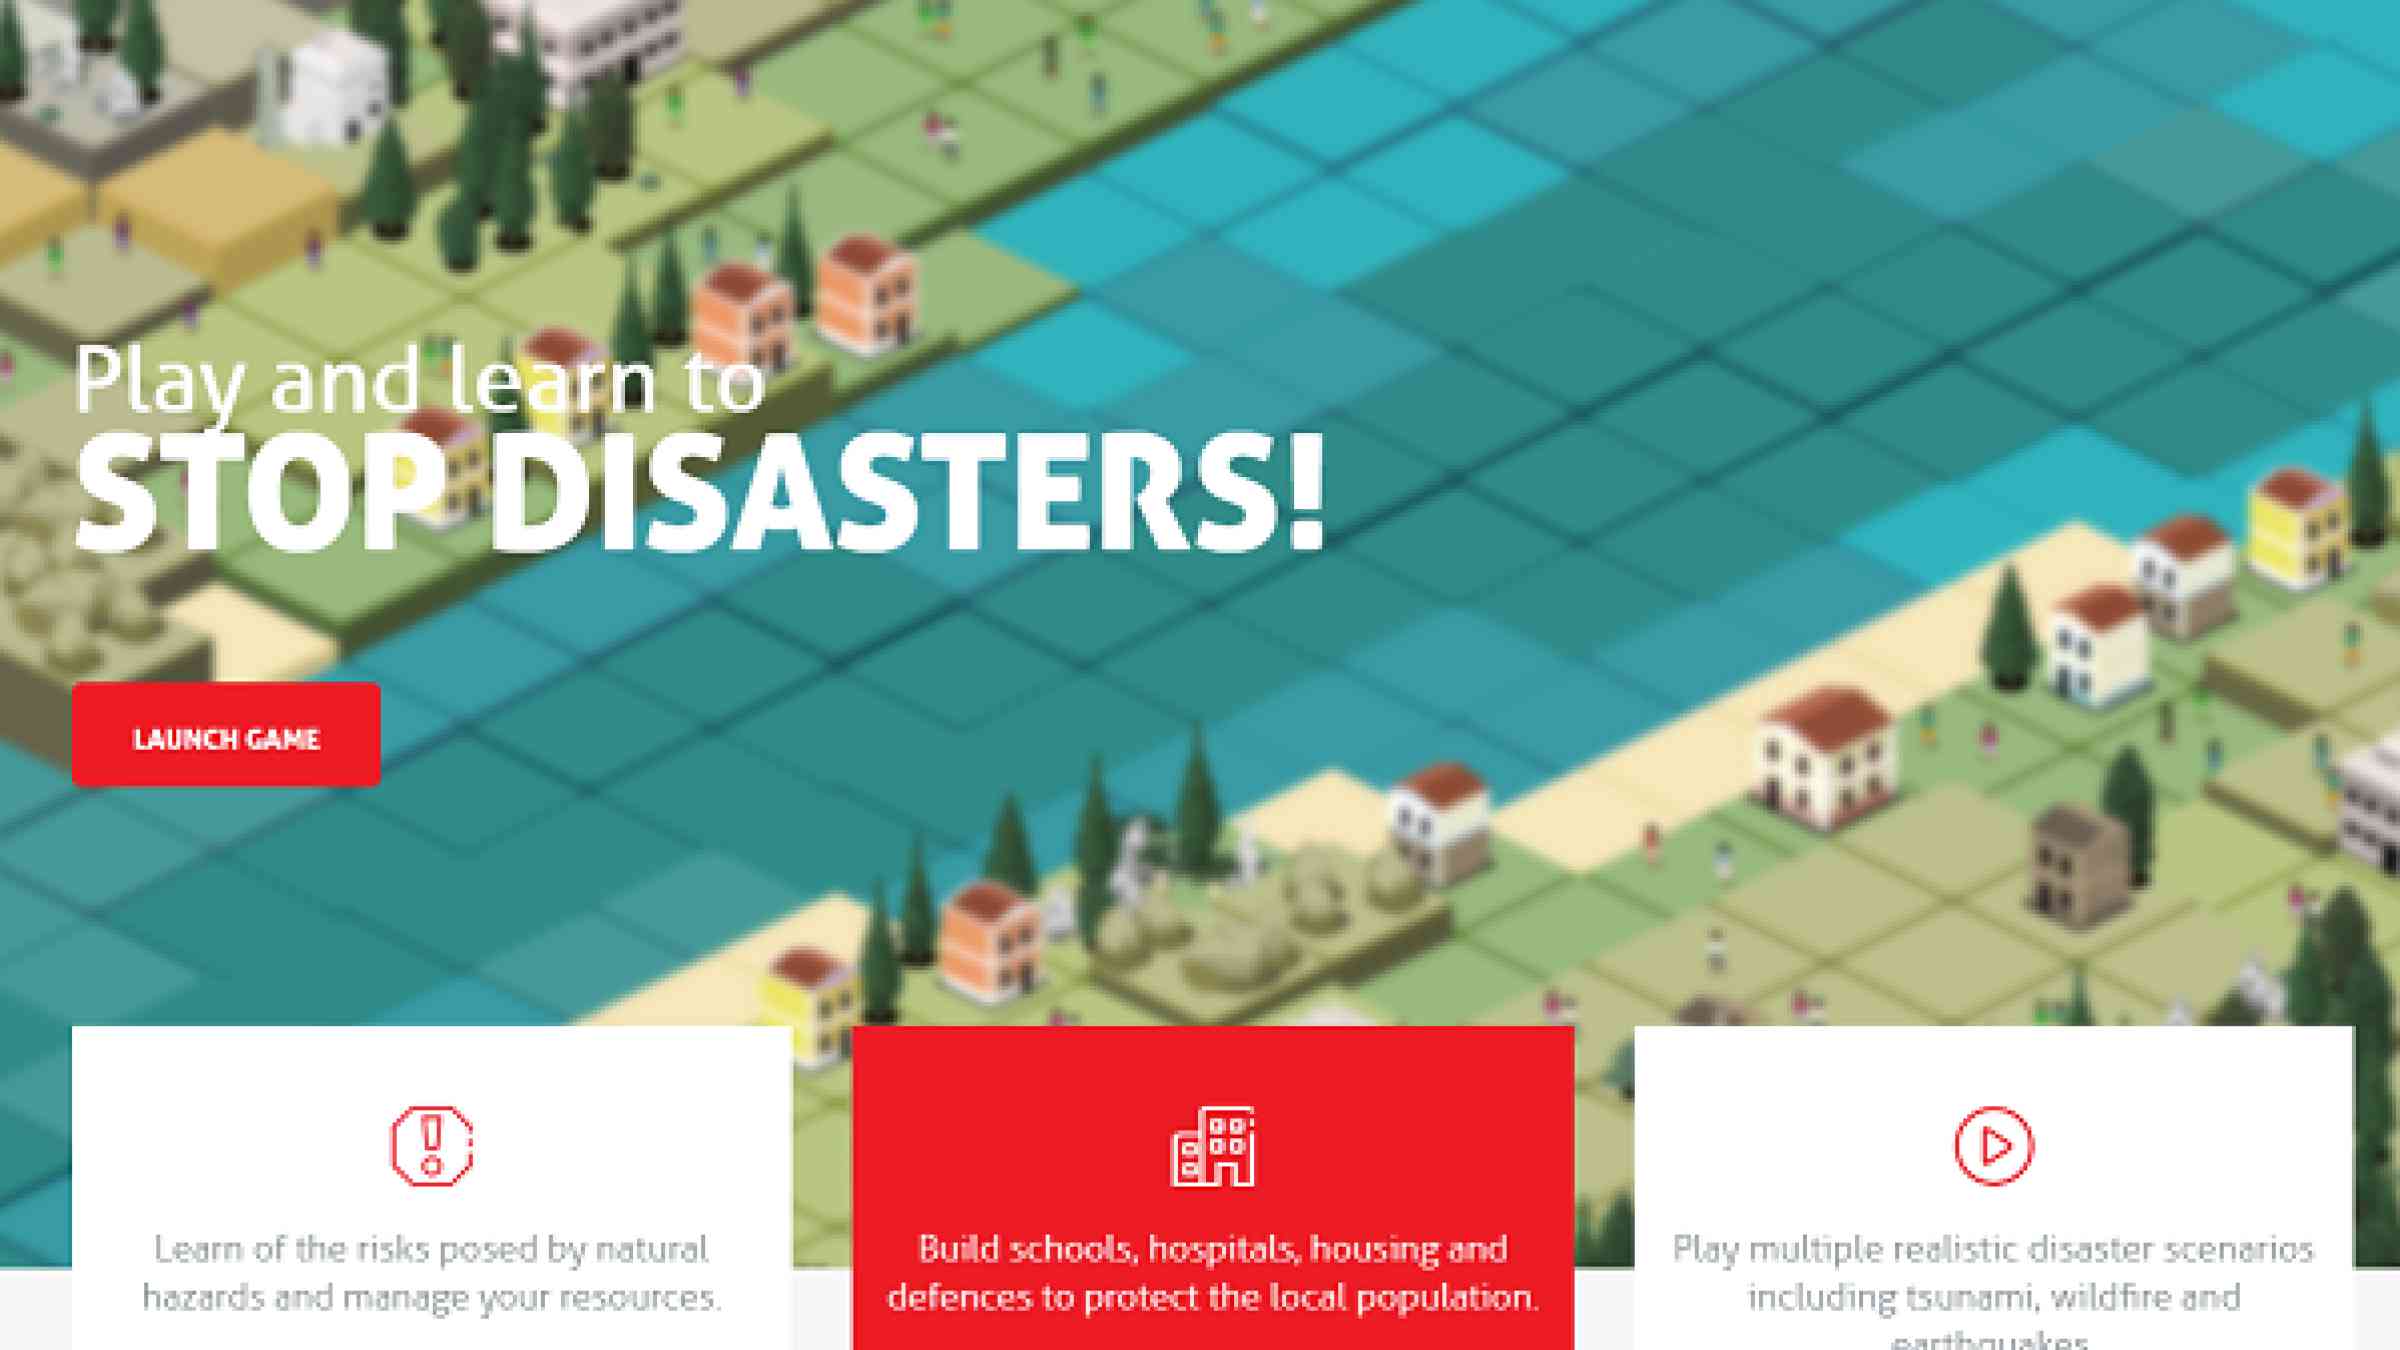 The Stop Disasters Game encourages thinking about preparedness and emergency planning